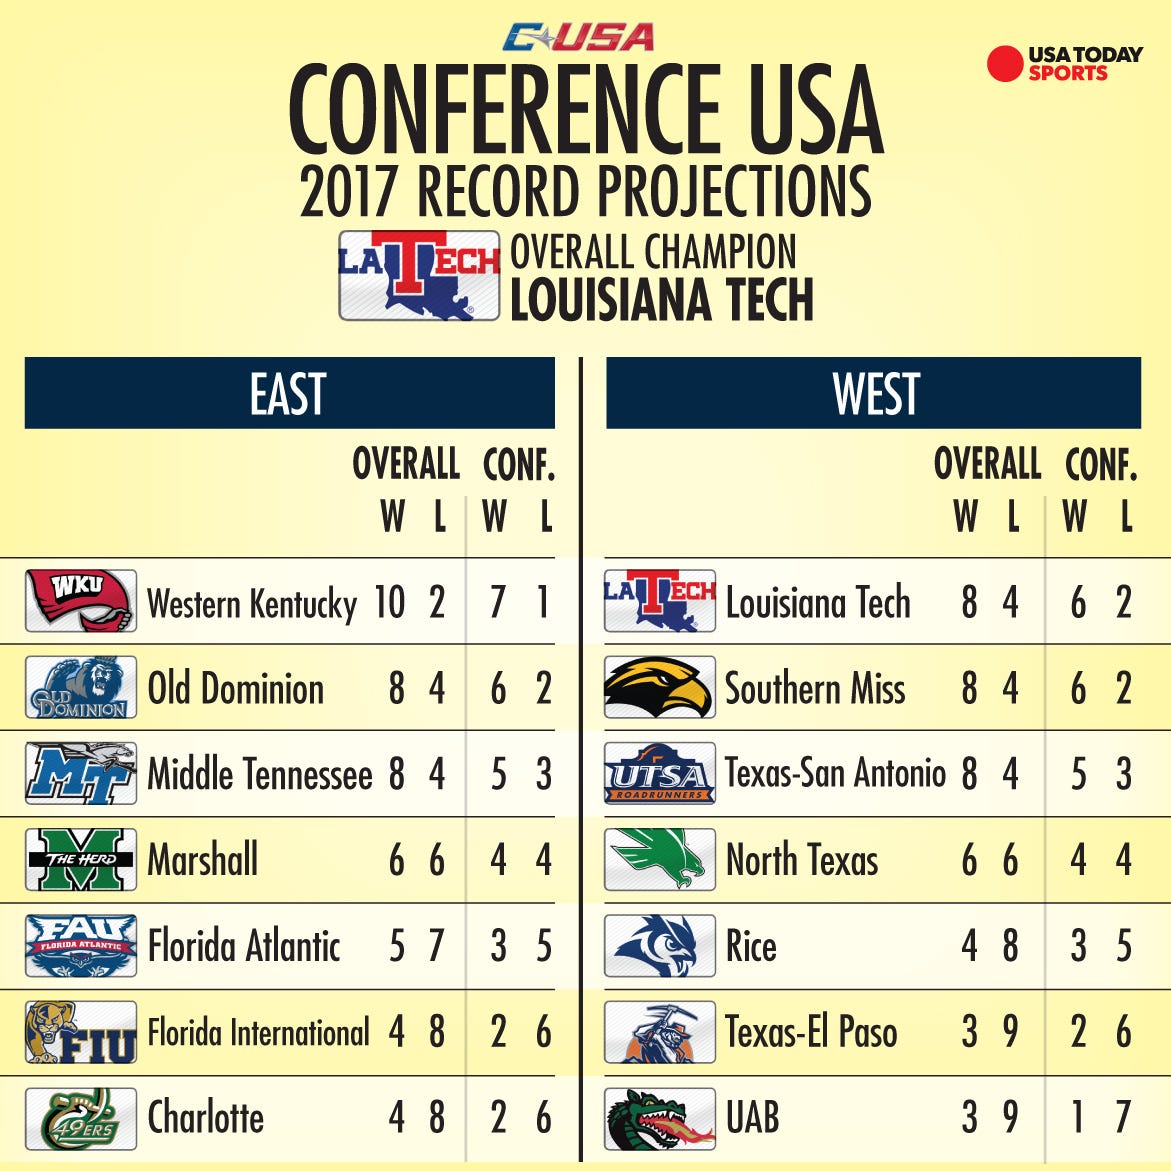 636374575485783236-conference-usa-projections-v2.jpg